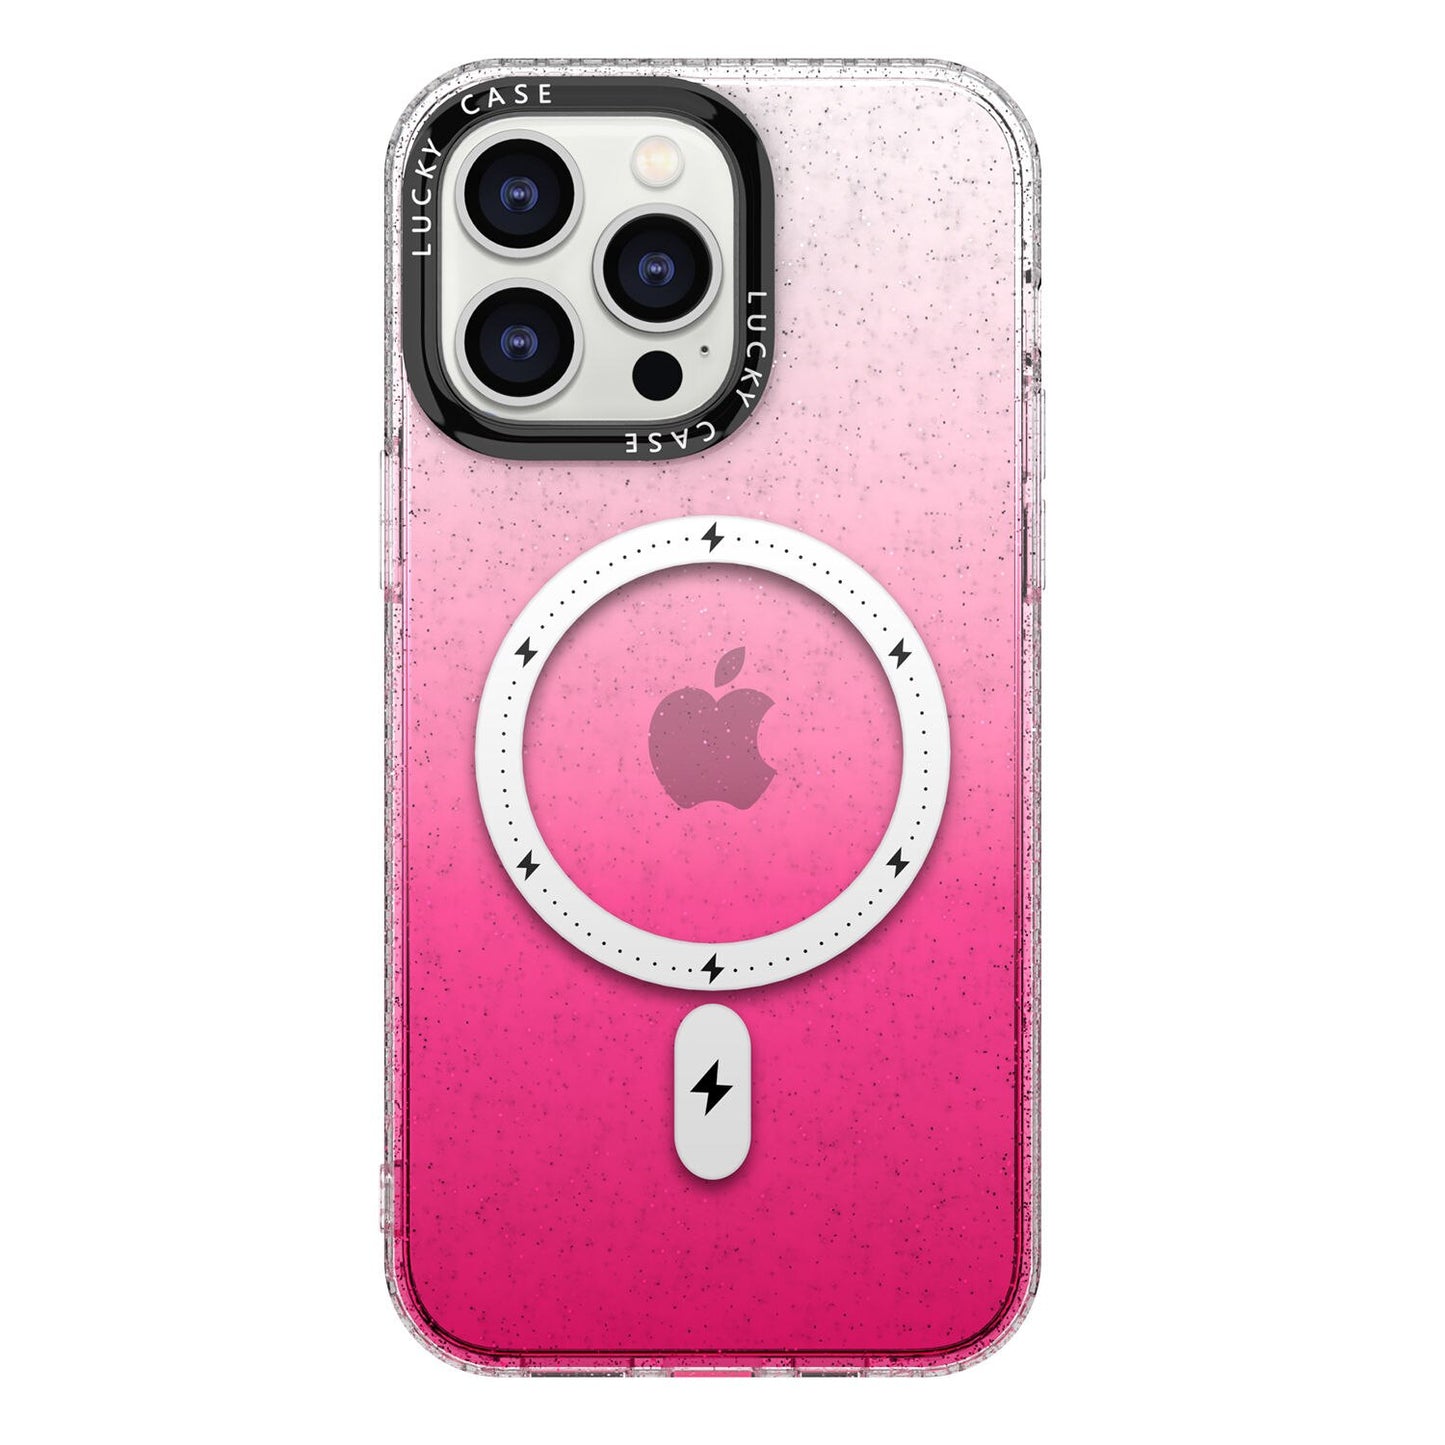 Magnetic Bling Case for iPhone 14 13 12 Pro Max Support for MagSafe Cute Twinkle Glitter Design Shockproof Silicone Phone Cover - For iPhone 12 12 Pro / Pink / China - For iPhone 12 ProMax / Pink / China - For iPhone 13 / Pink / China - For iPhone 13 Pro / Pink / China - For iPhone 13 ProMax / Pink / China - For iPhone 14 / Pink / China - For iPhone 14 Plus / Pink / China - For iPhone 14 Pro / Pink / China - For iPhone 14 ProMax / Pink / China - For iPhone 12 12 Pro / Pink / United States - F...